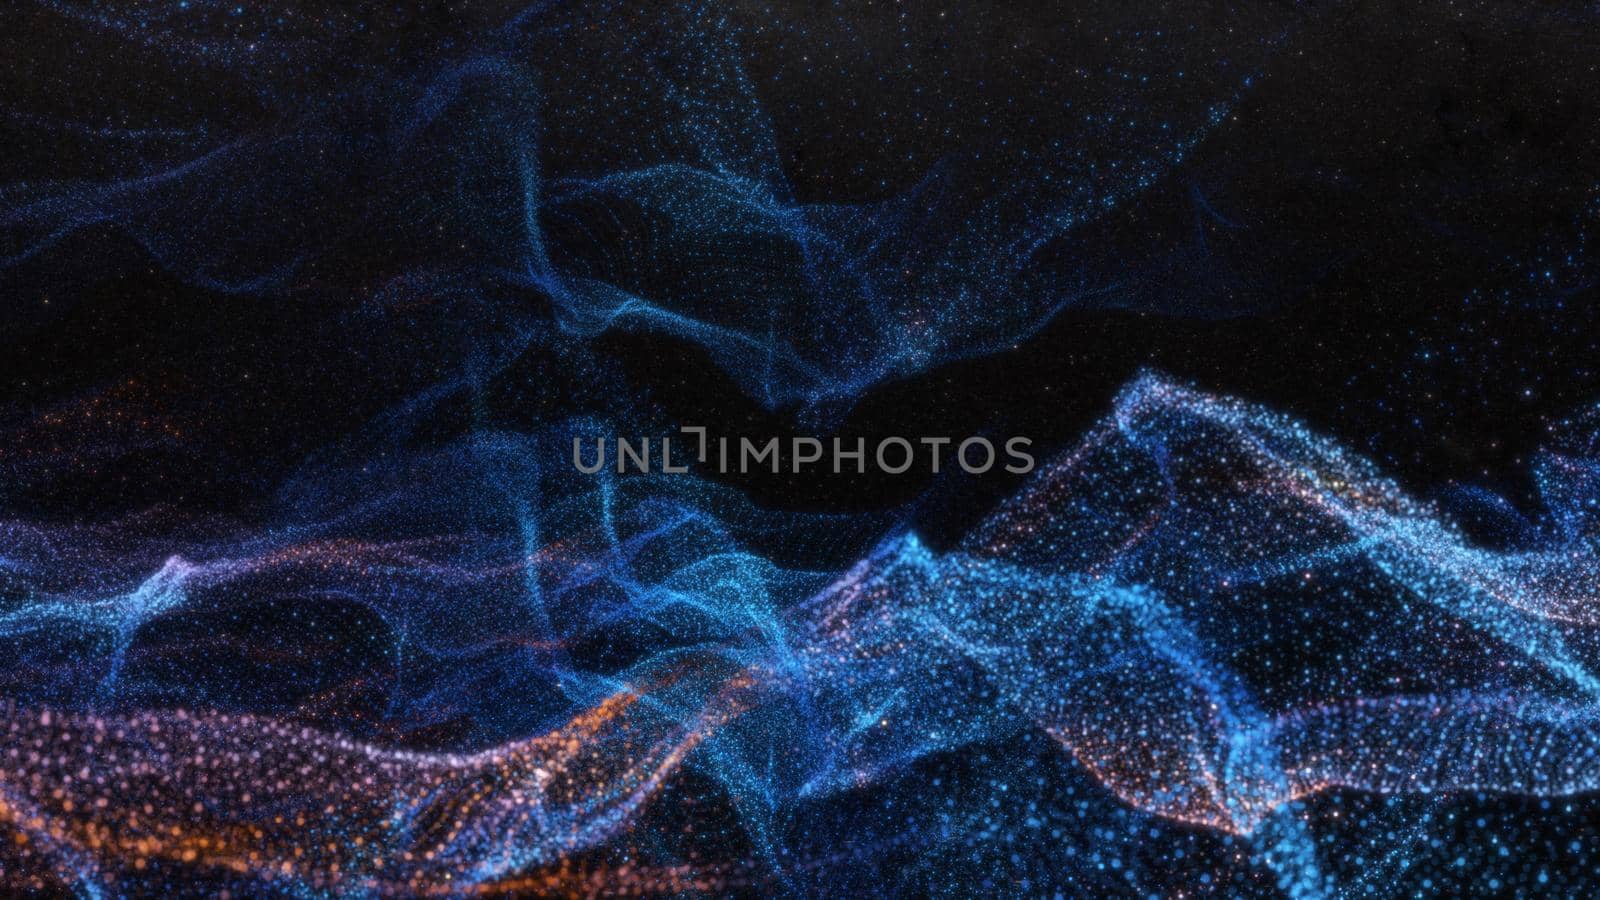 Abstract particle waves with depth of field effect. Futuristic 3d illustration. Technology concept. Cyber UI, HUD element